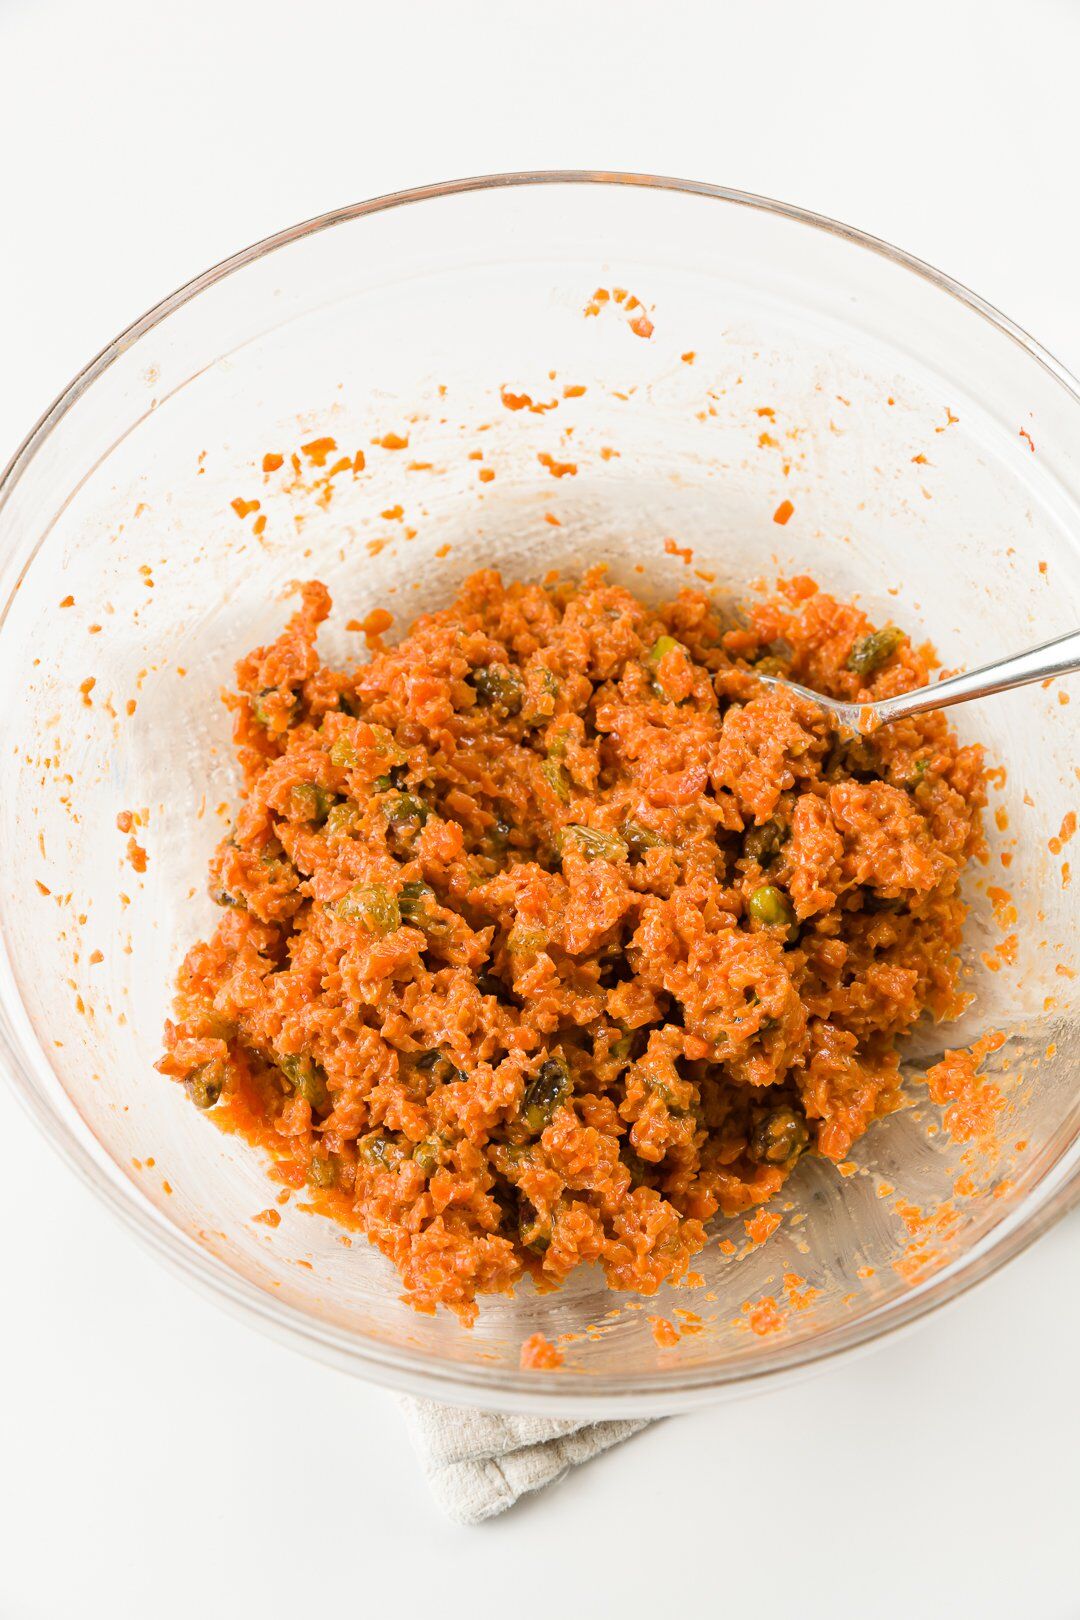 Carrot halwa when the milk is no longer visable